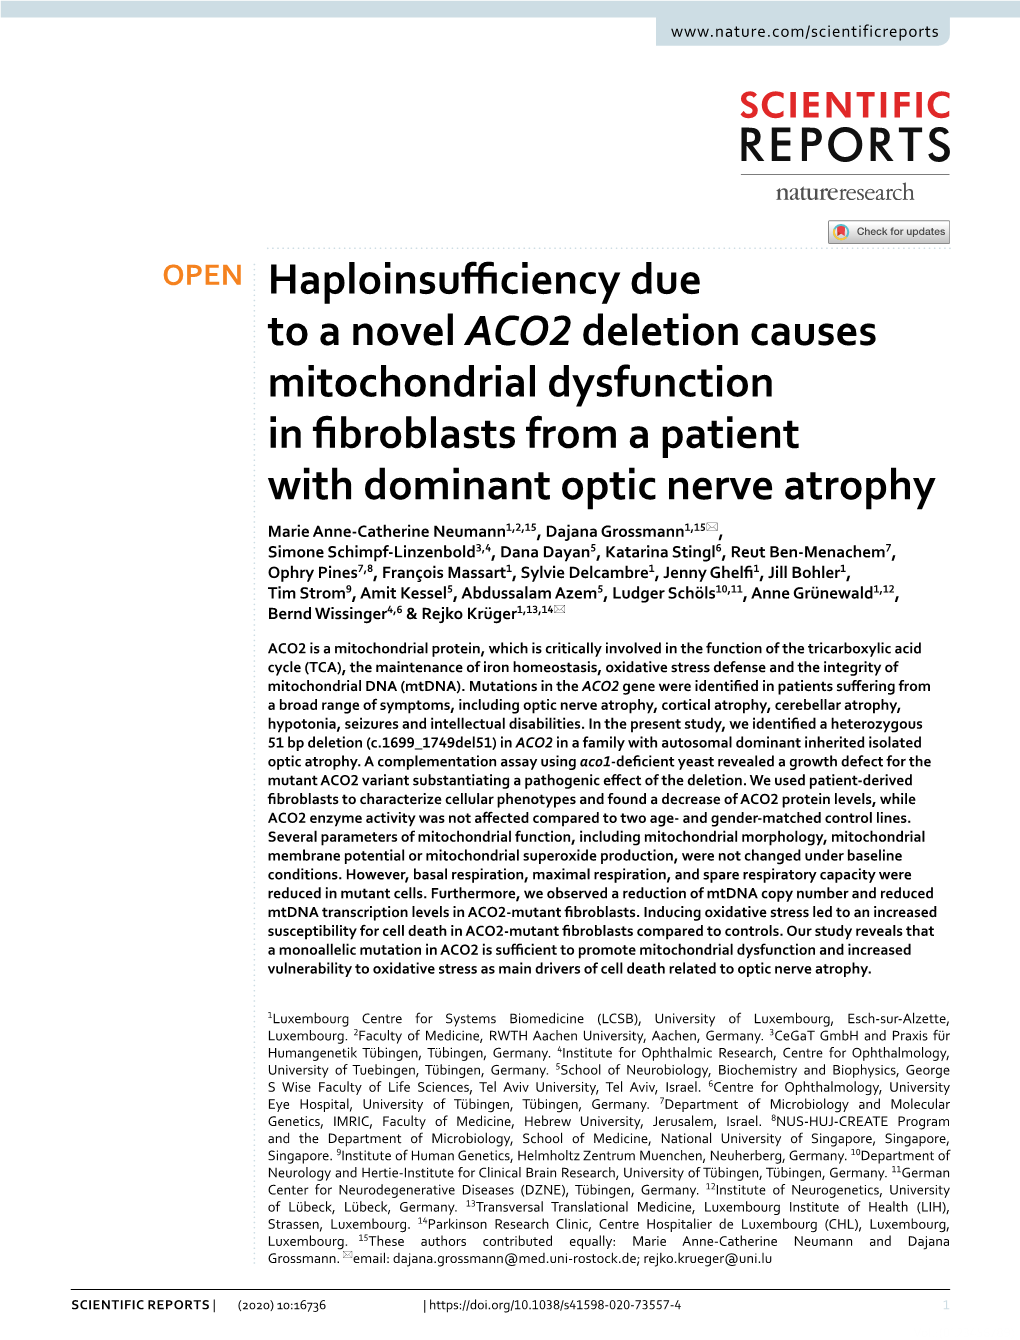 Haploinsufficiency Due to a Novel ACO2 Deletion Causes